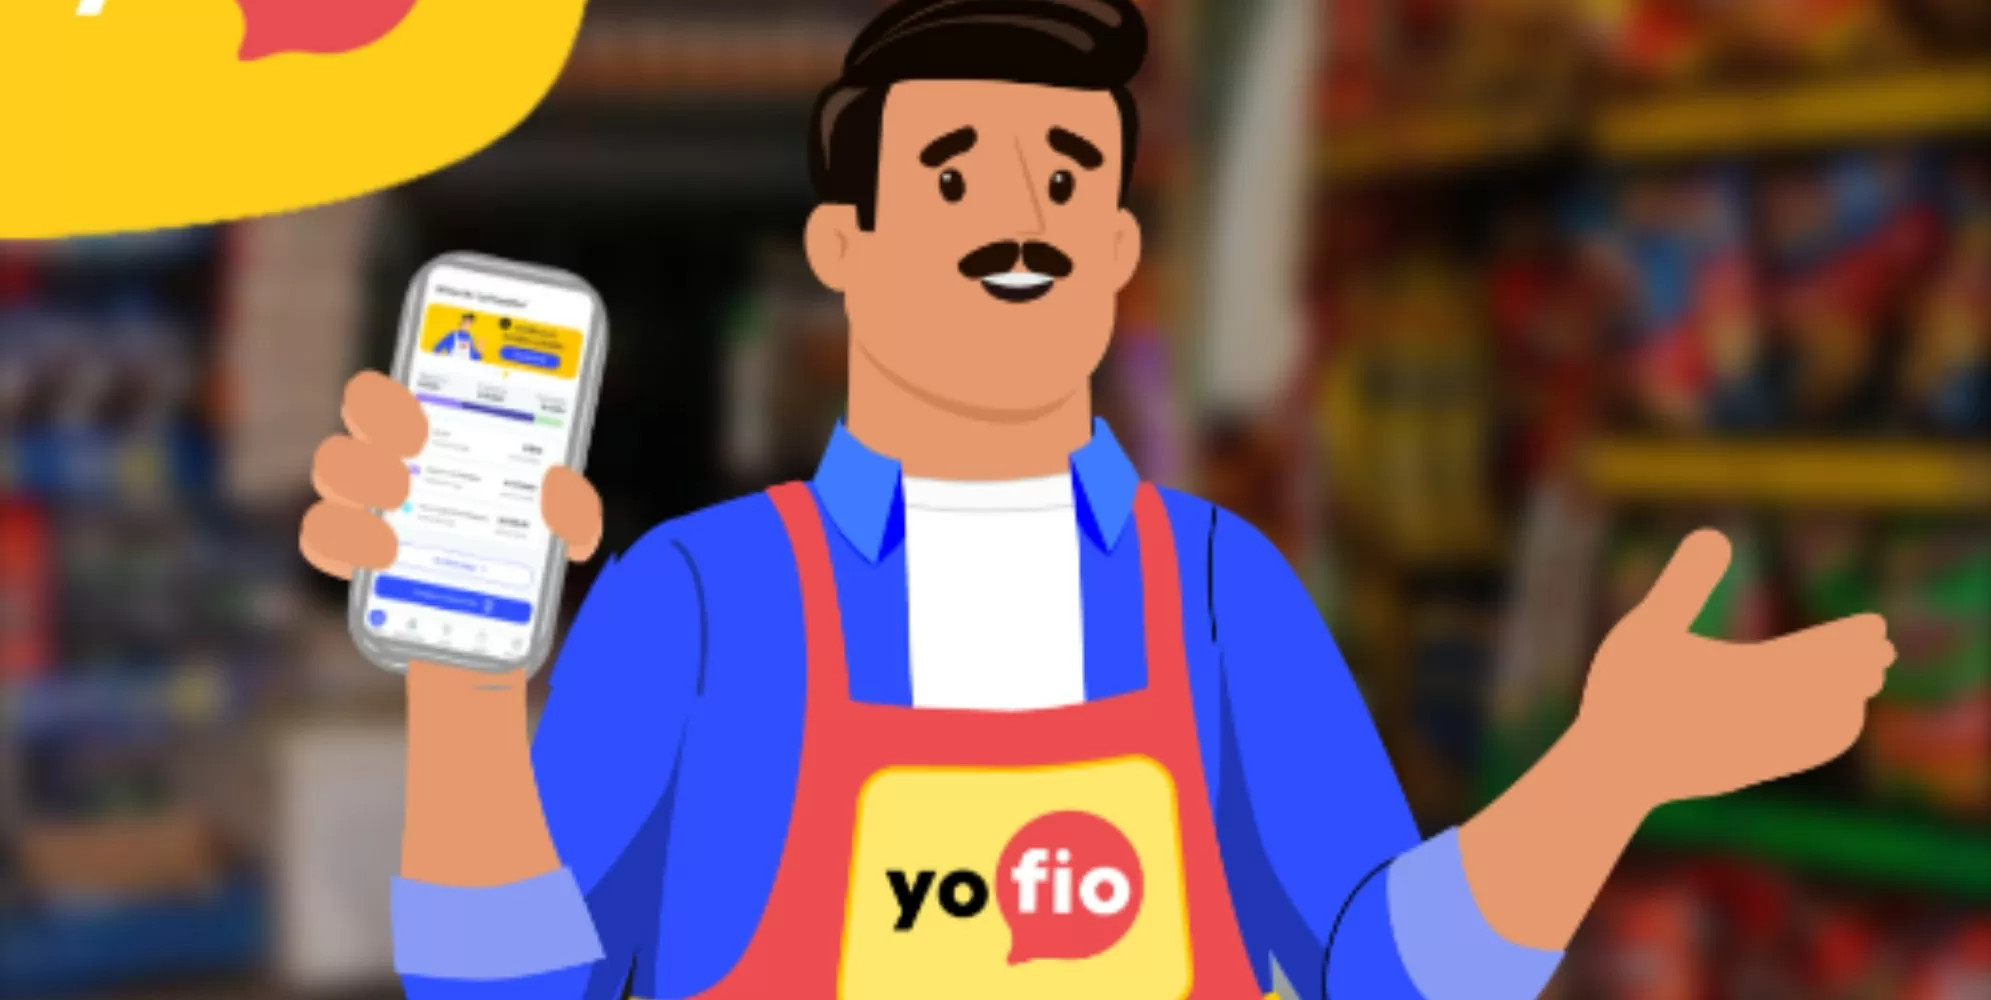 Yofio Secures $10m Investment To Support Mexican Microbusinesses